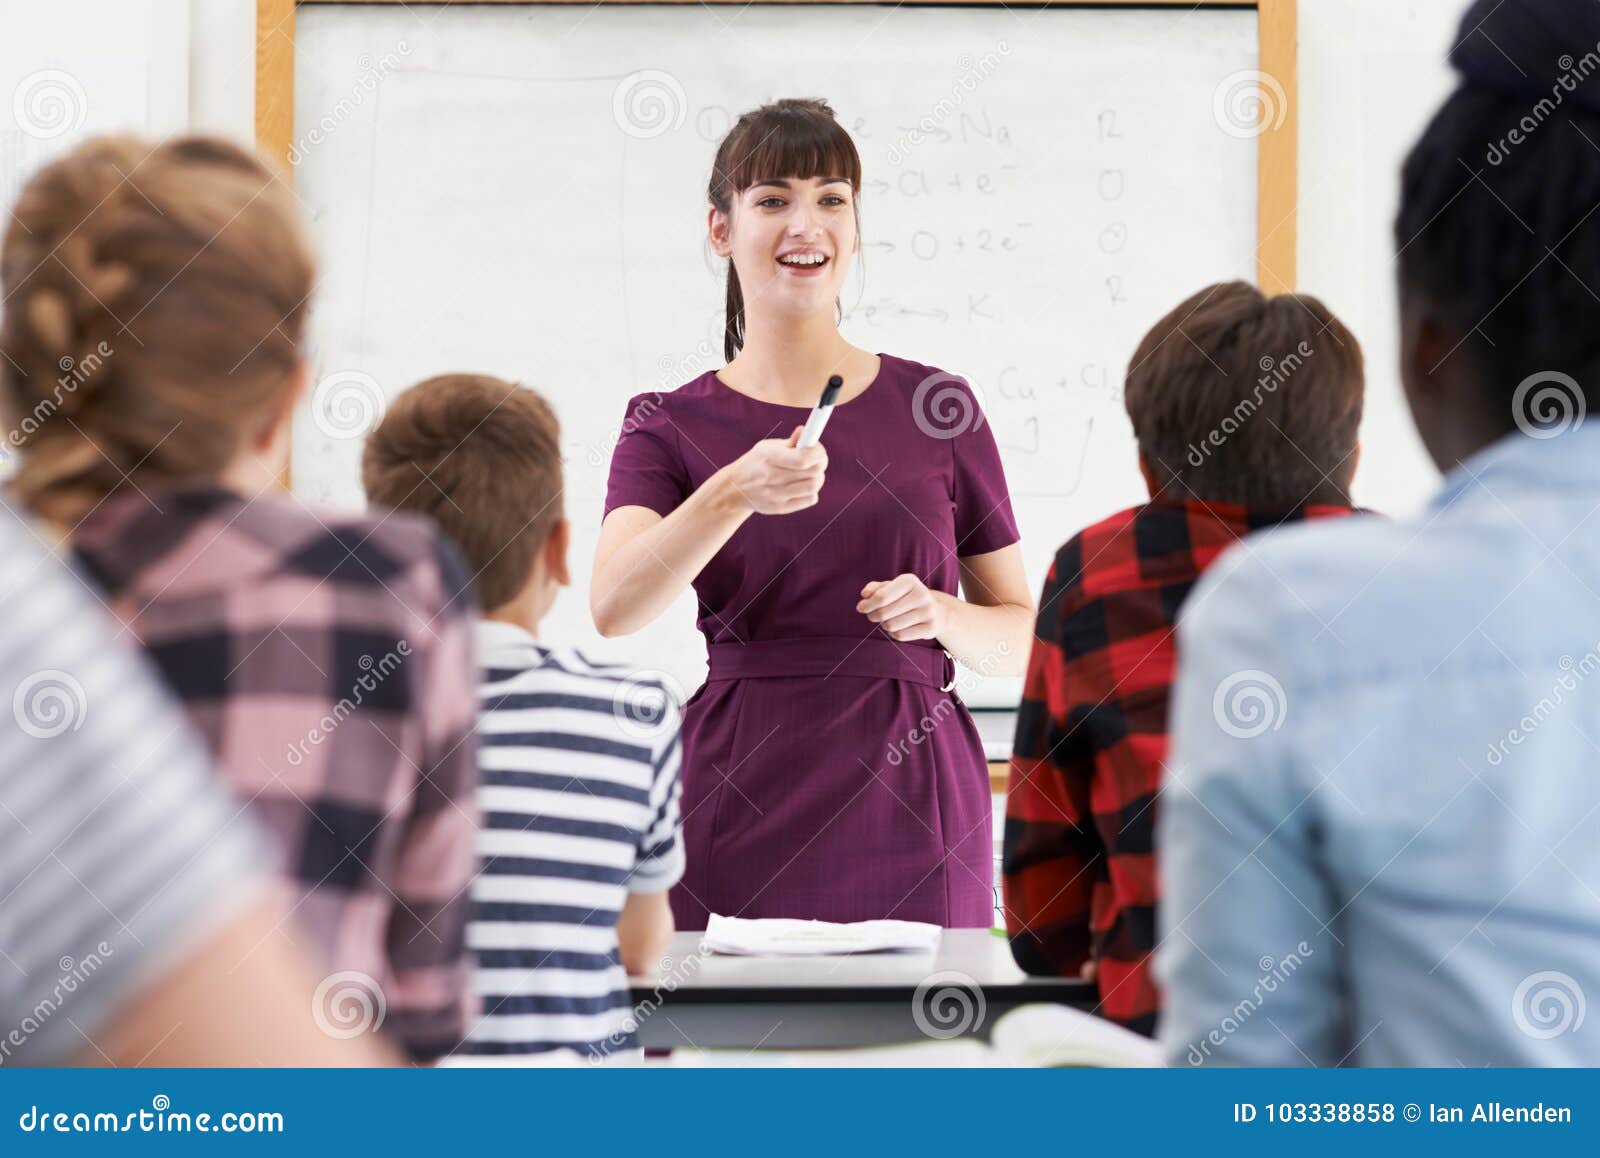 enthusiastic teacher with class of teenage students